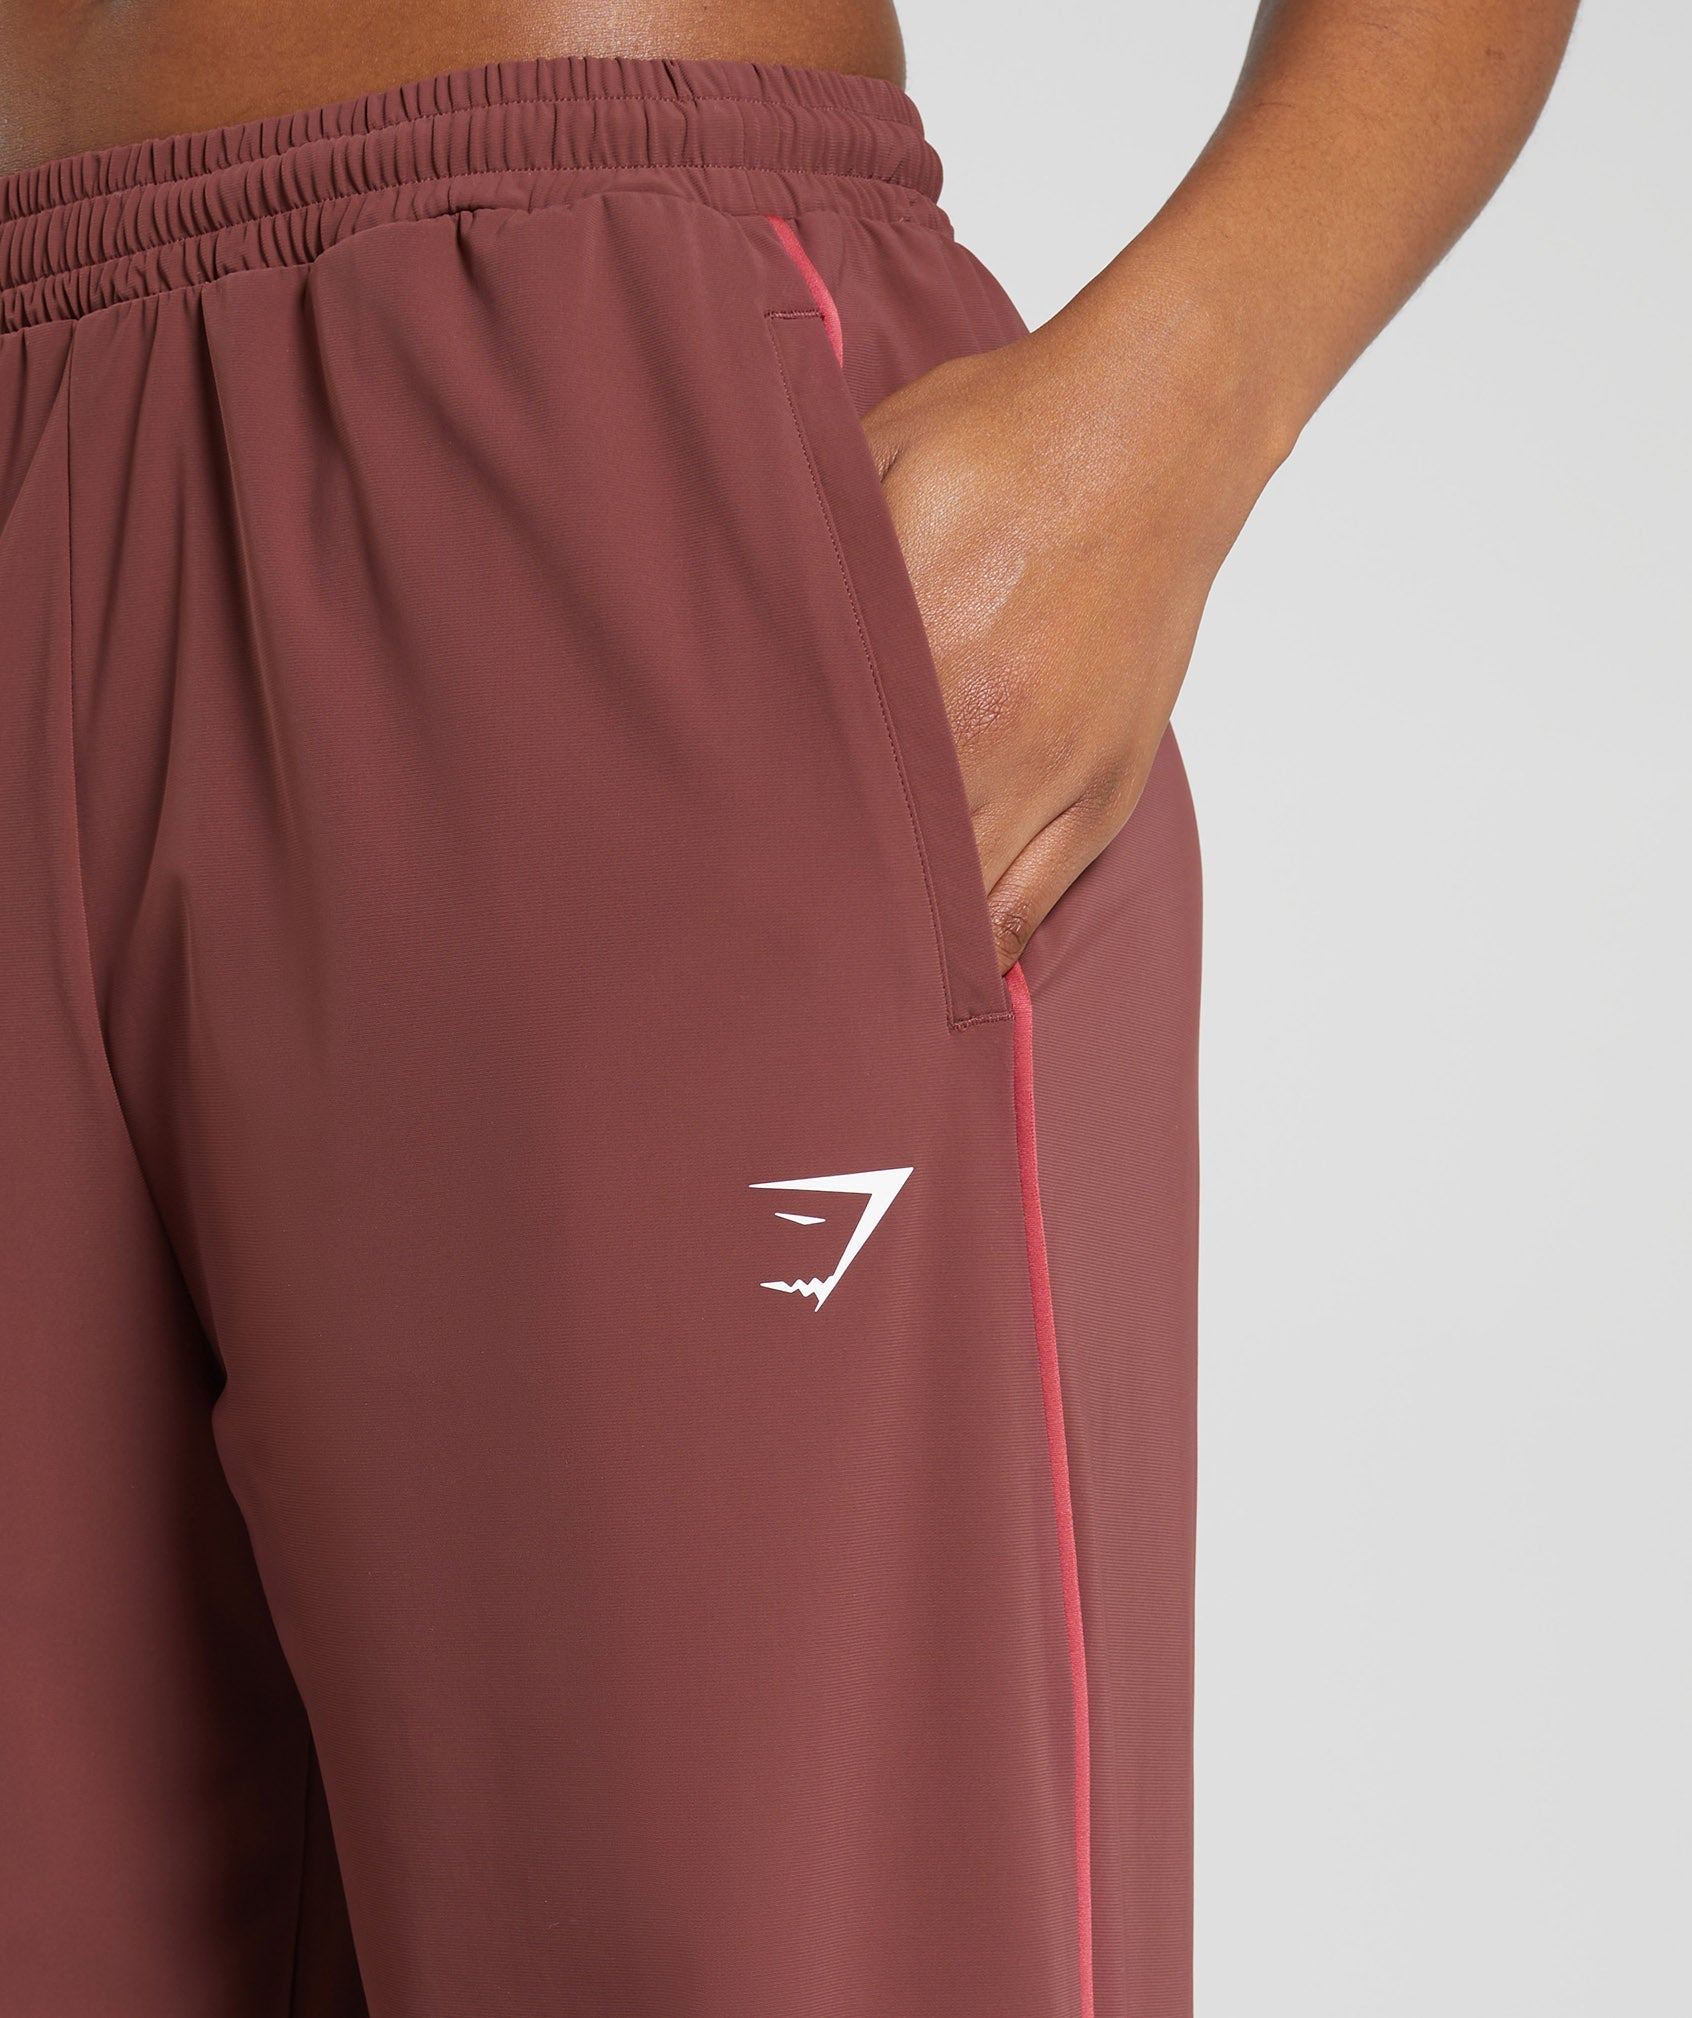 Gymshark Stitch Feature Woven Pants - Burgundy Brown